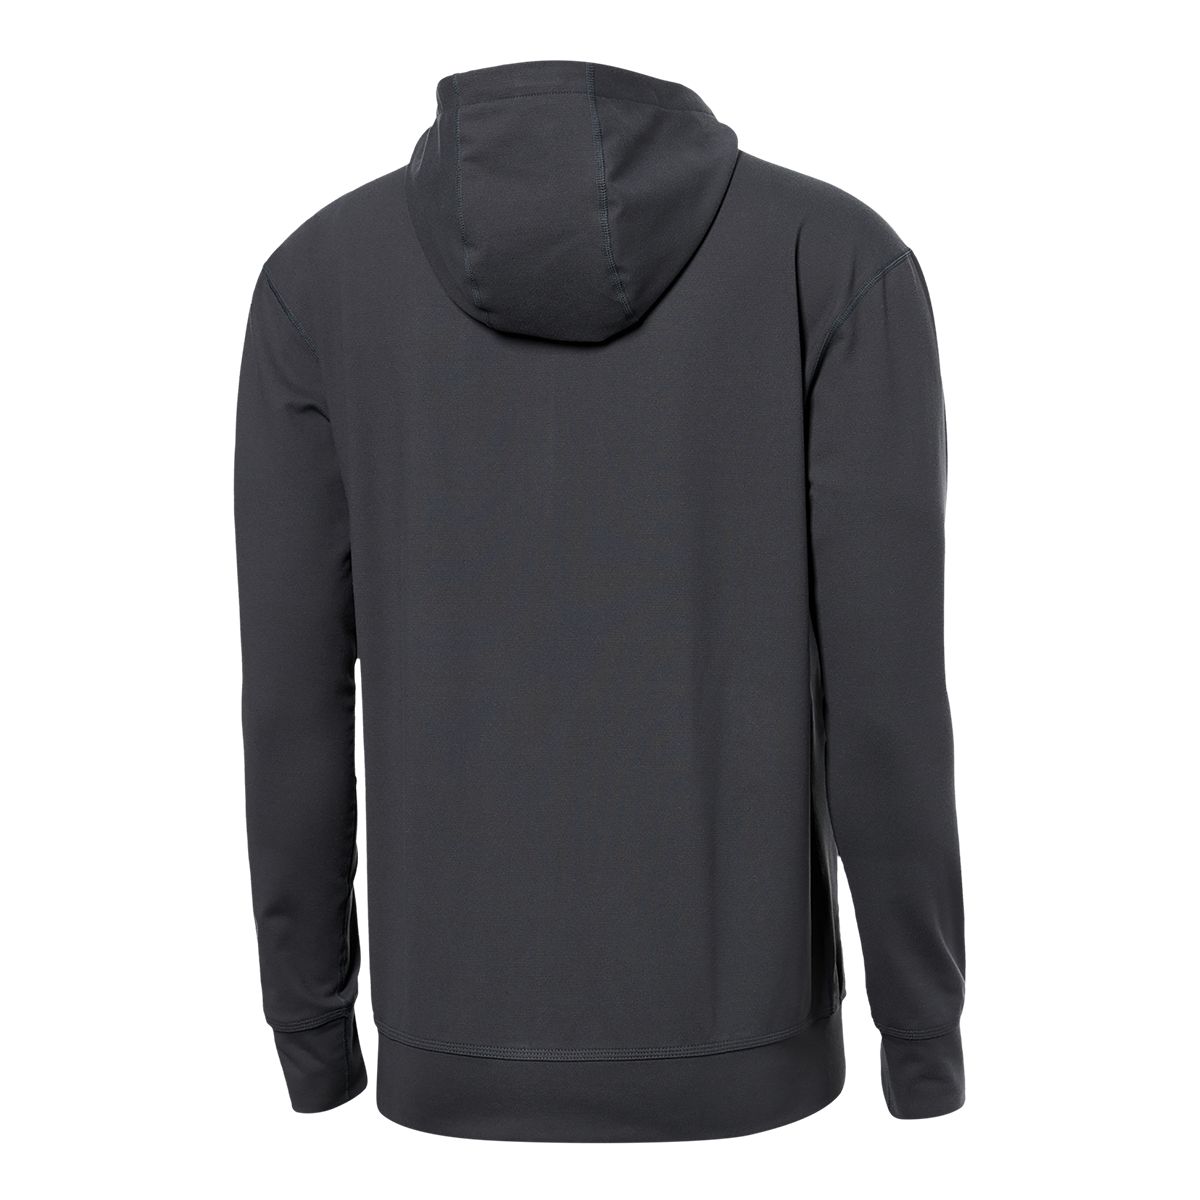 https://media-www.sportchek.ca/product/div-03-softgoods/dpt-72-casual-clothing/sdpt-01-mens/334241312/saxx-men-s-trailzer-full-zip-hoodie-2949b8eb-0a0a-4fa0-a510-89115e6a3d9e-jpgrendition.jpg?imdensity=1&imwidth=1244&impolicy=mZoom